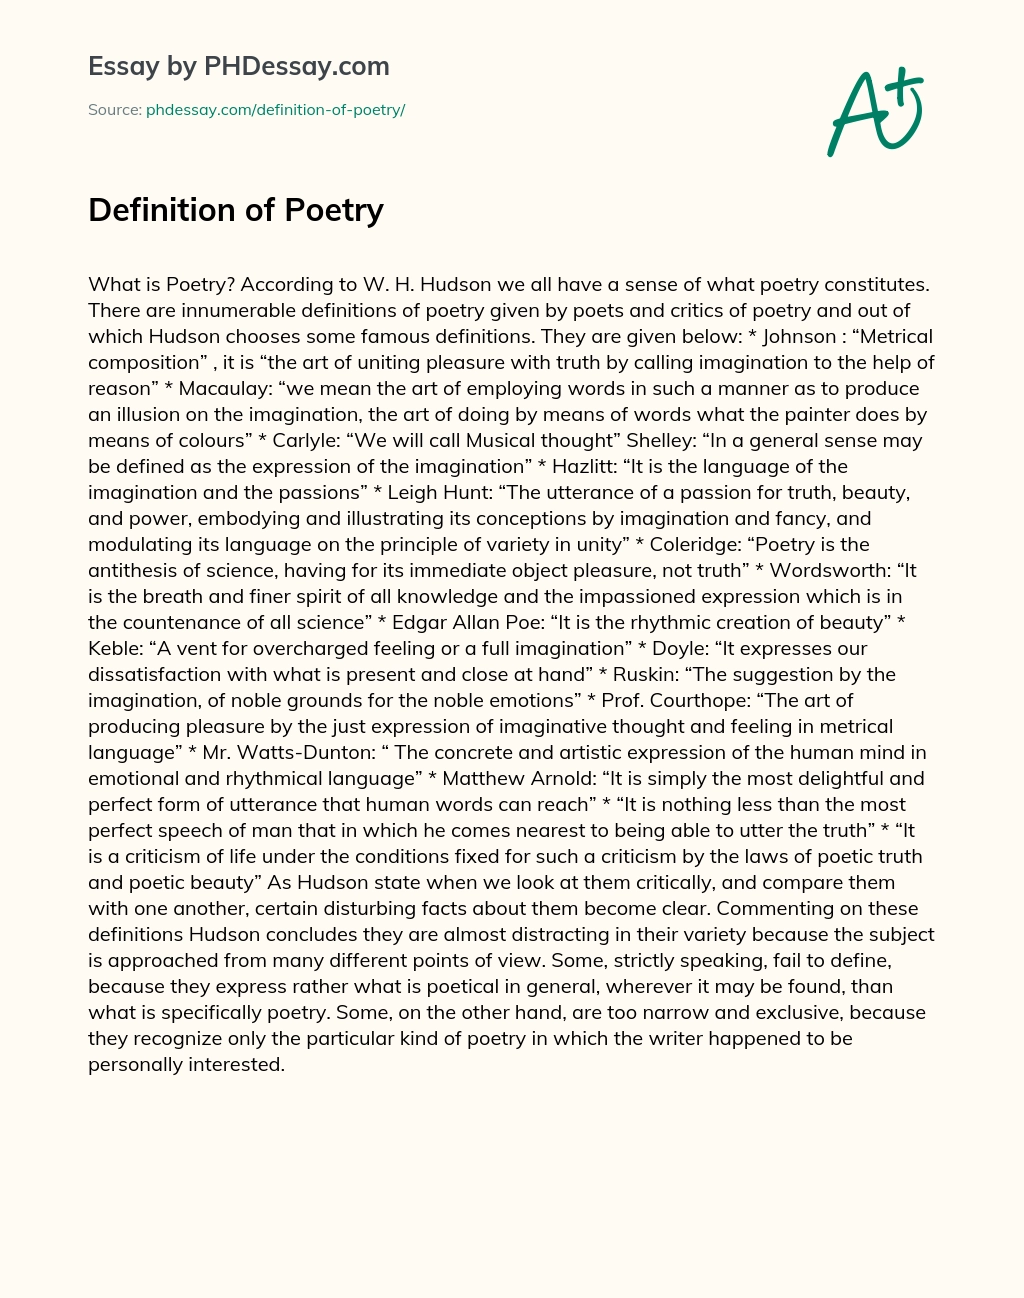 Definition of Poetry essay